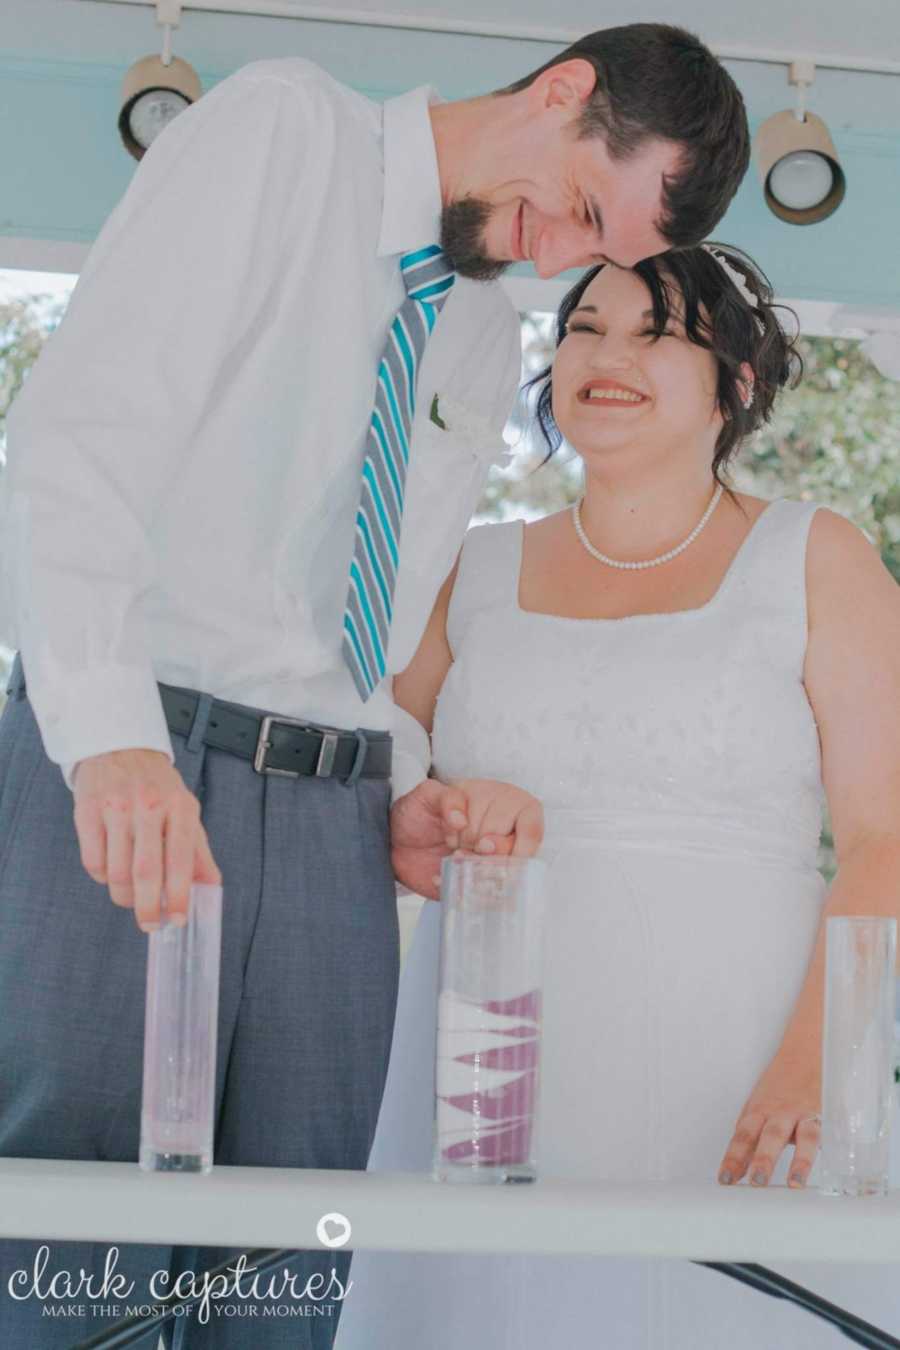 Bride with diabetes smiles as she lookds up at groom who stands beside her